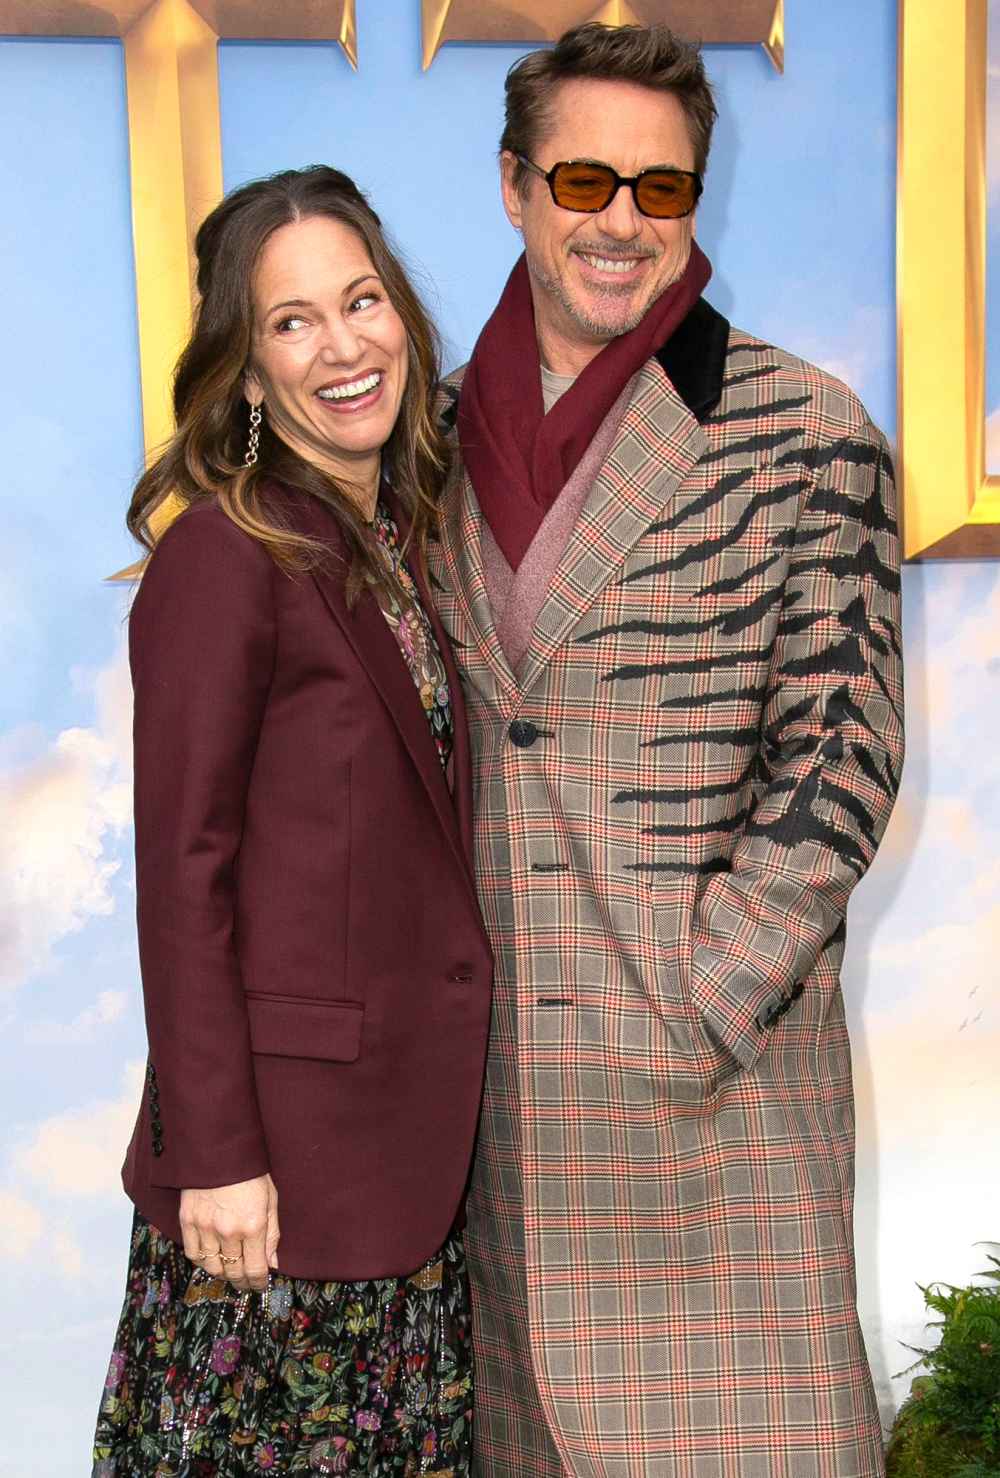 Robert Downey Jr. Shares Hilarious ‘Eternal Vow’ to Wife Susan Downey on Her Birthday